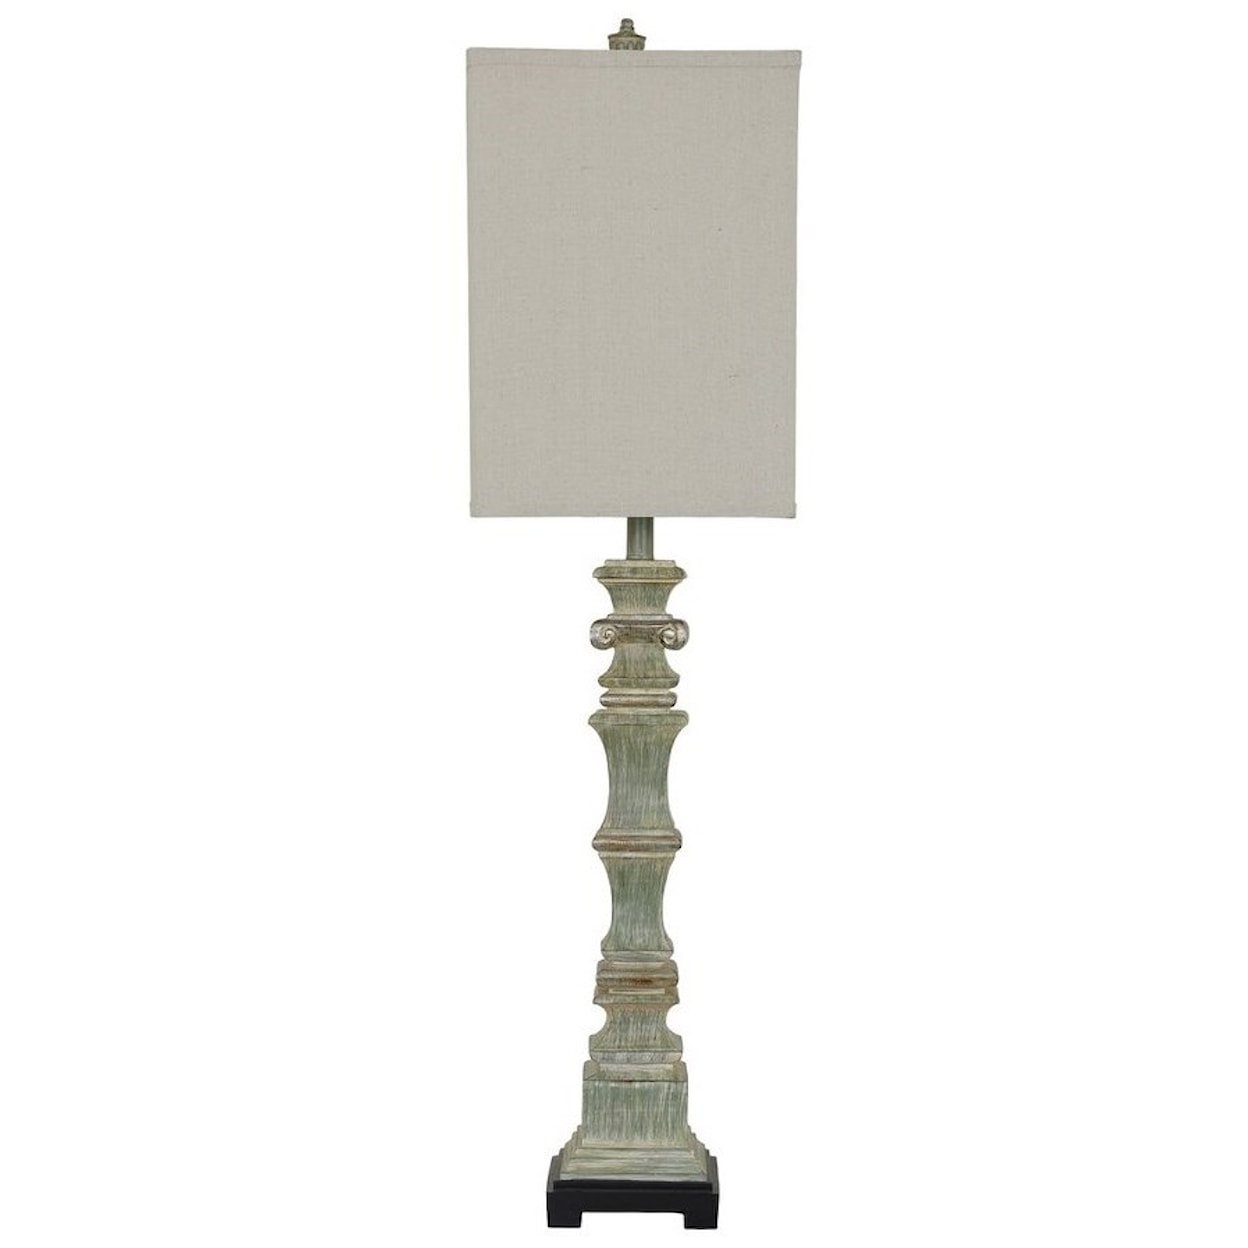 Crestview Collection Lighting Alegre Table Lamp